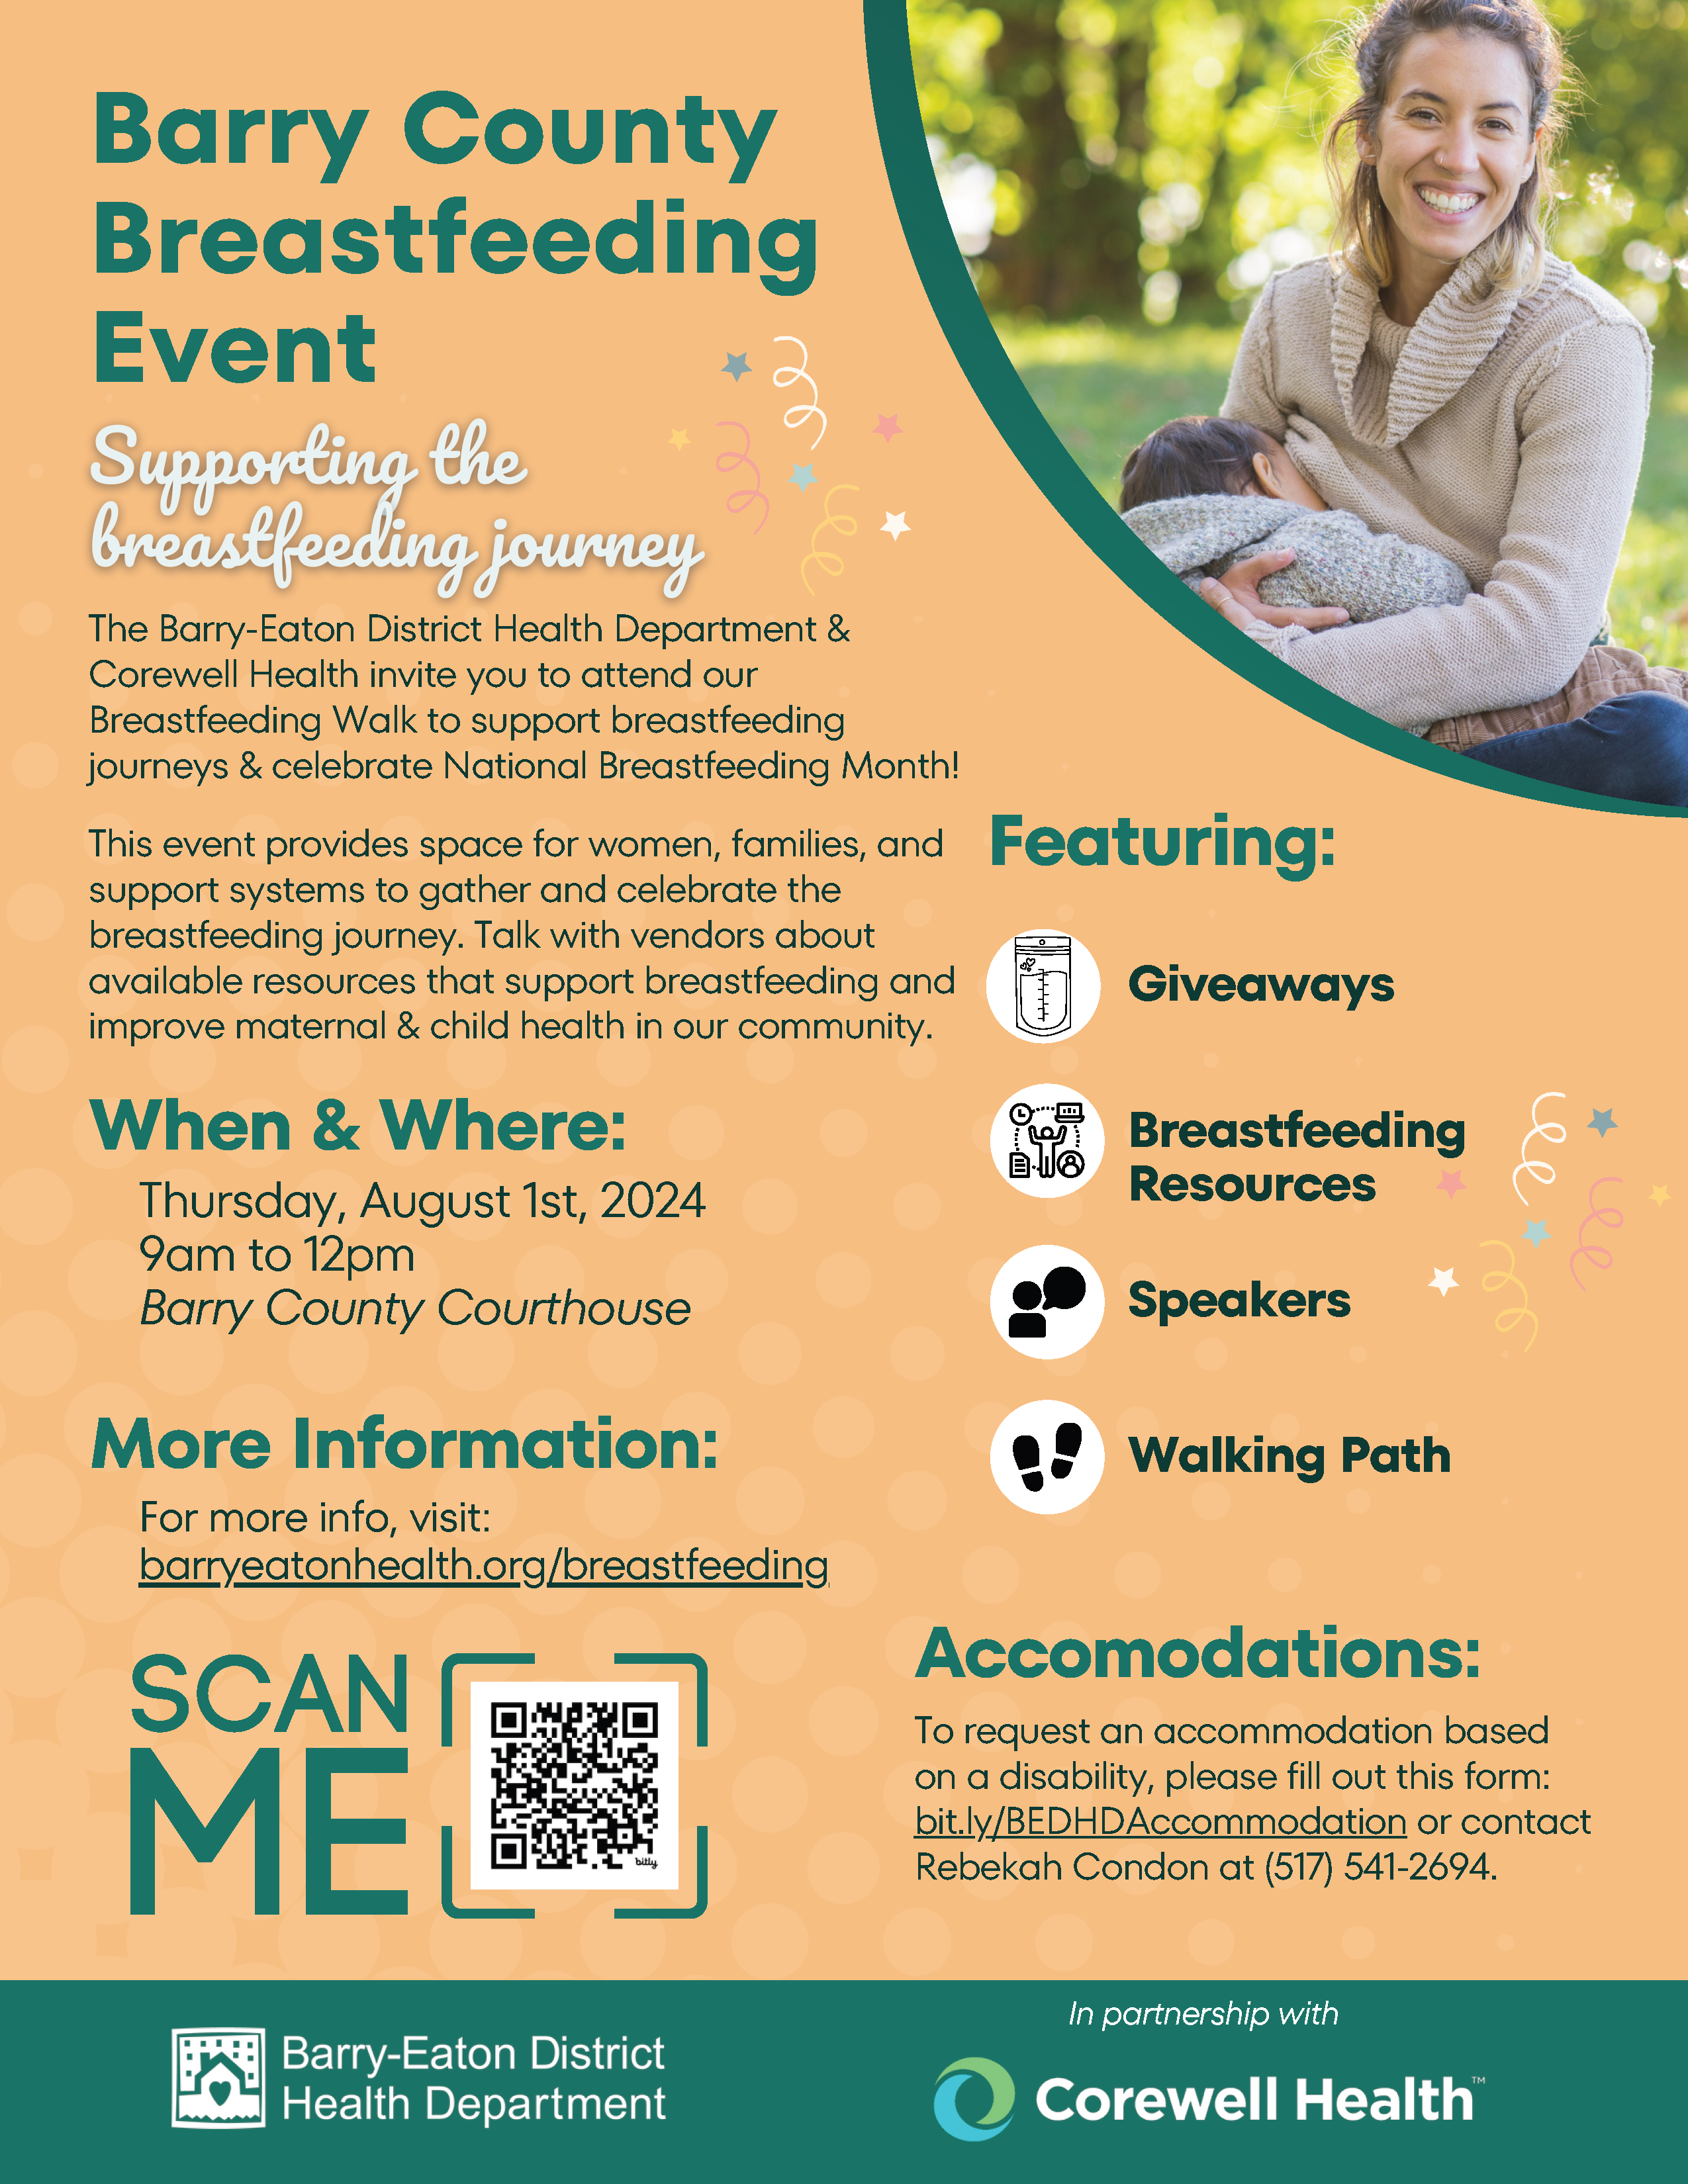 Barry County Breastfeeding Event Flyer